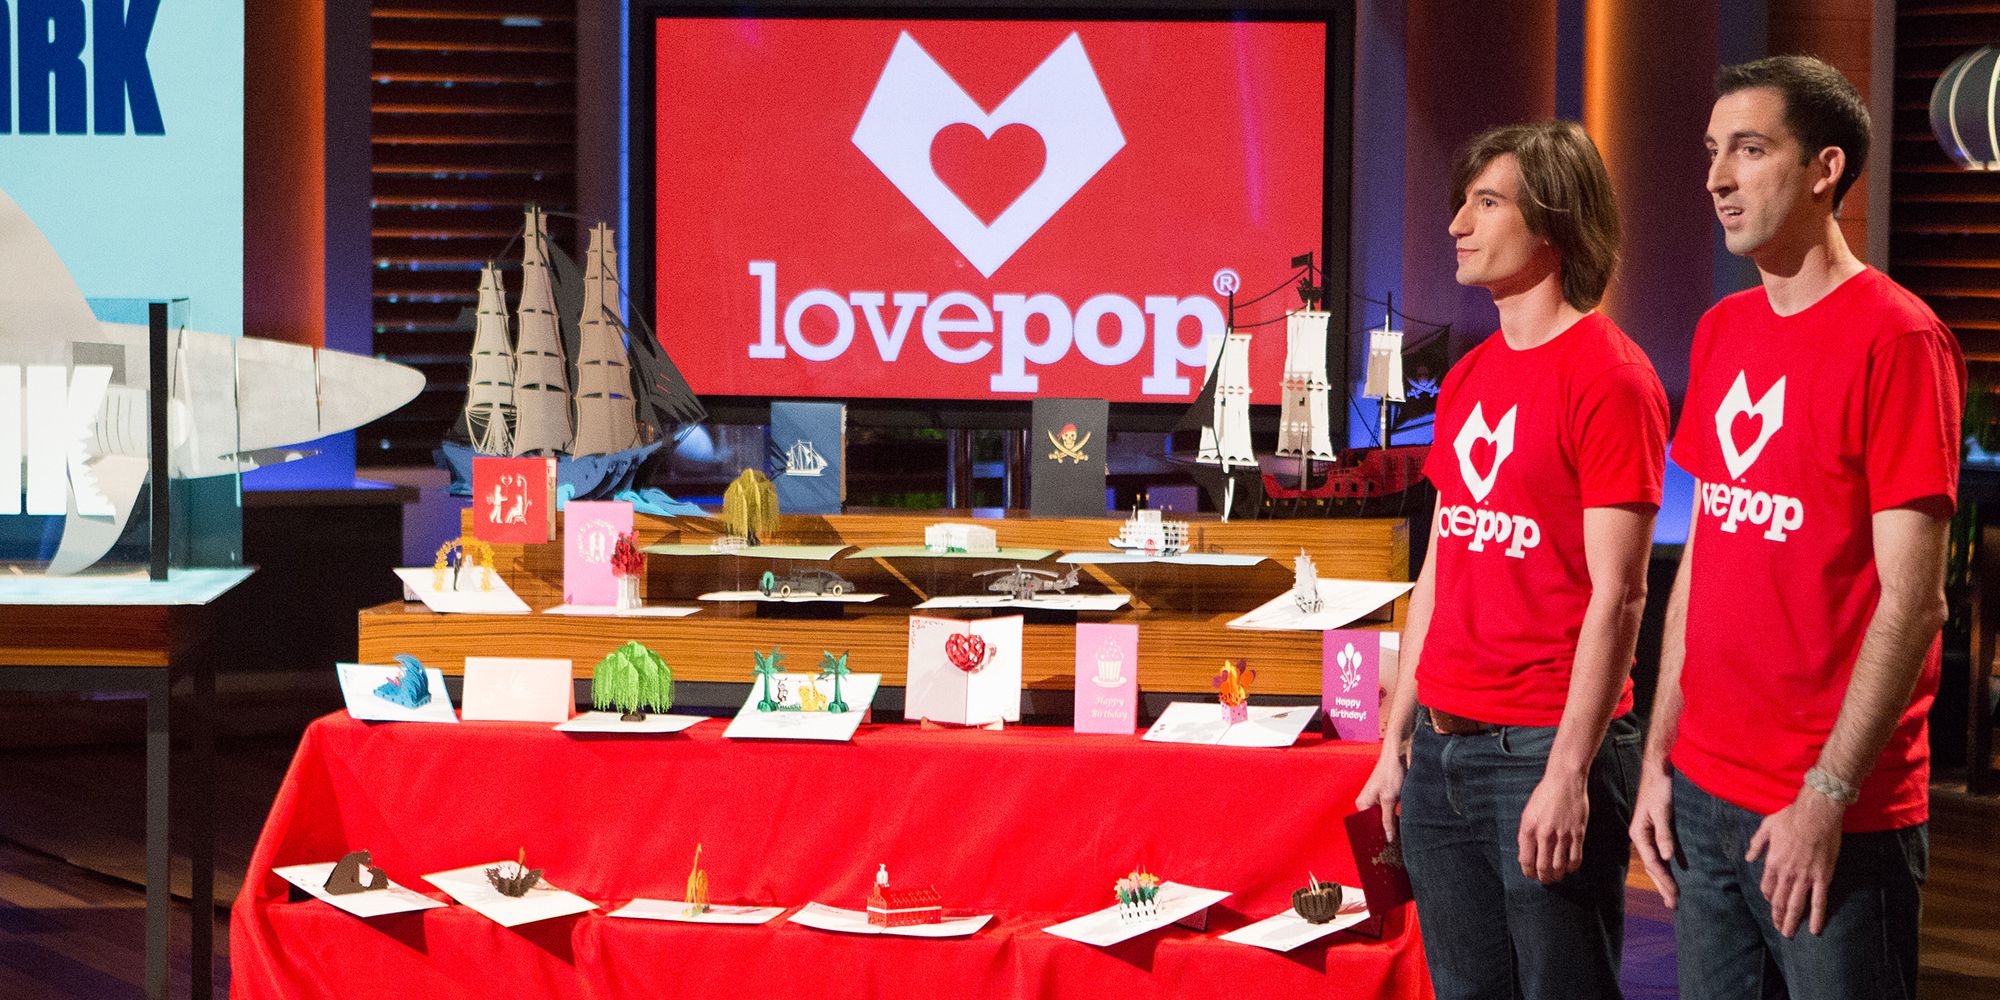 Lovepop greeting cards appeared on a season 7 episode of Shark Tank